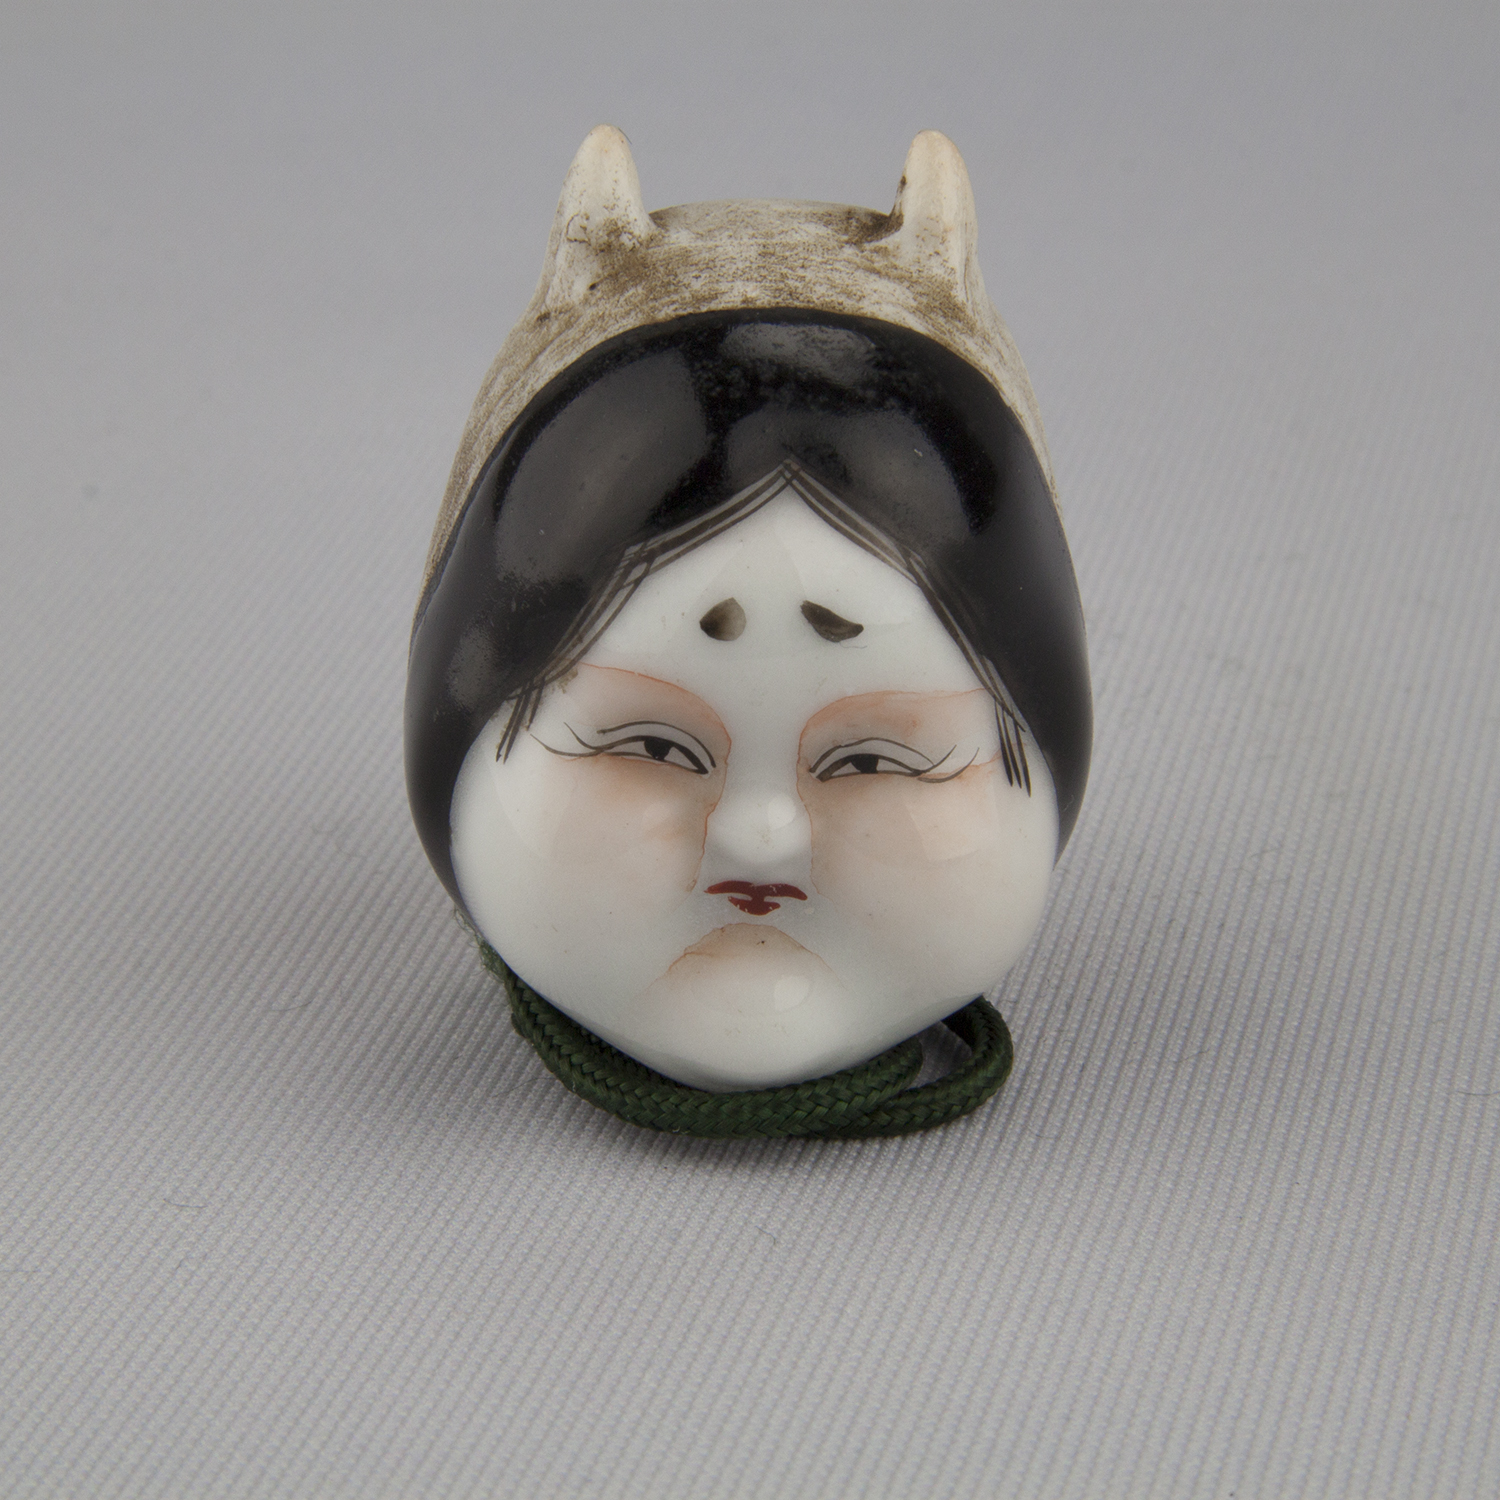 Netsuke depicting two masks: a female Noh face and a demon or guardian face, ca. 18th–19th century, glazed and unglazed porcelain, The Herman D. Doochin Collection, 1992.159